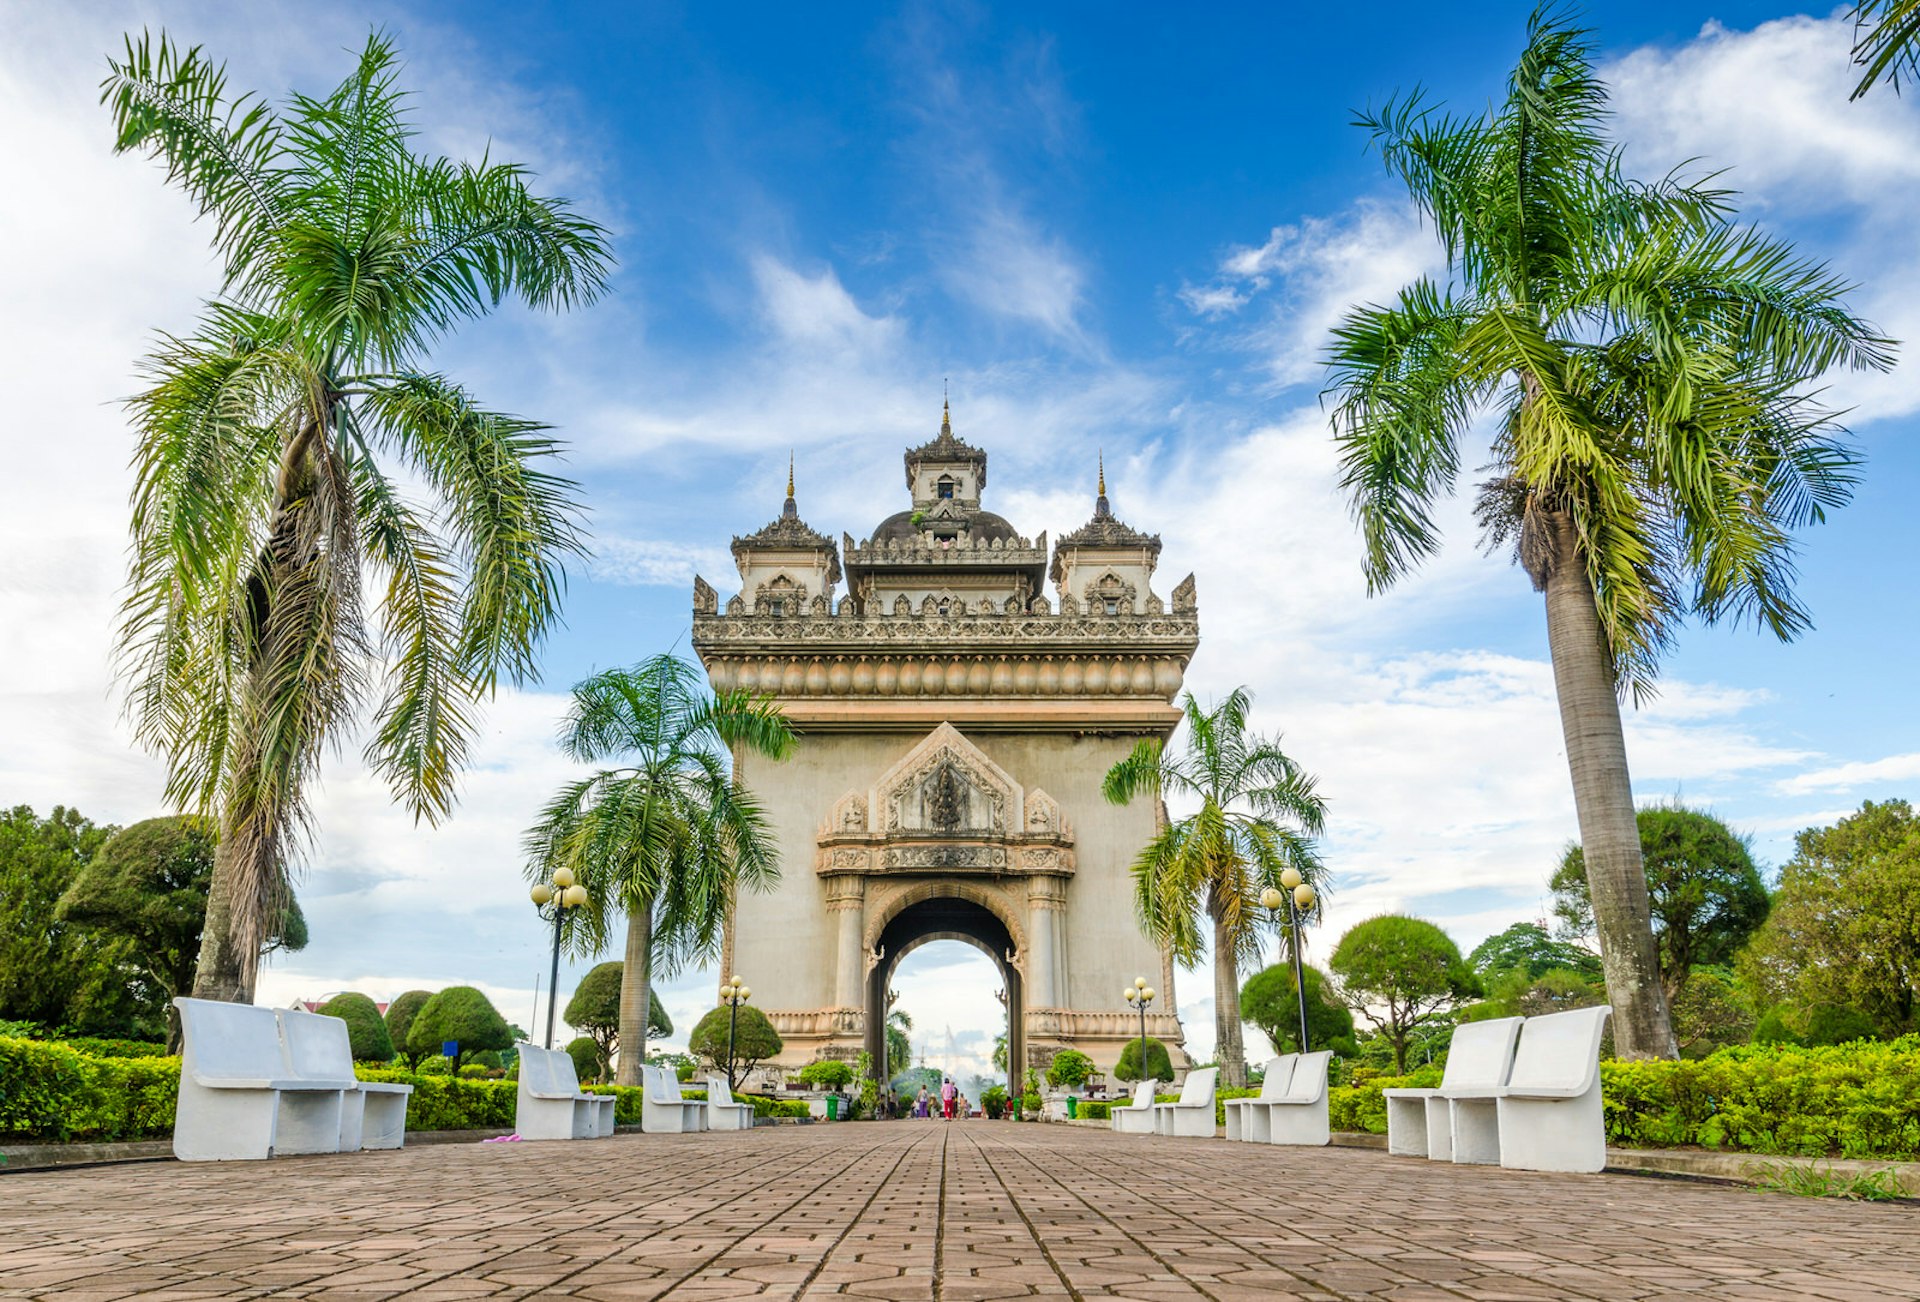 The Patuxai (Victory Gate) monument 